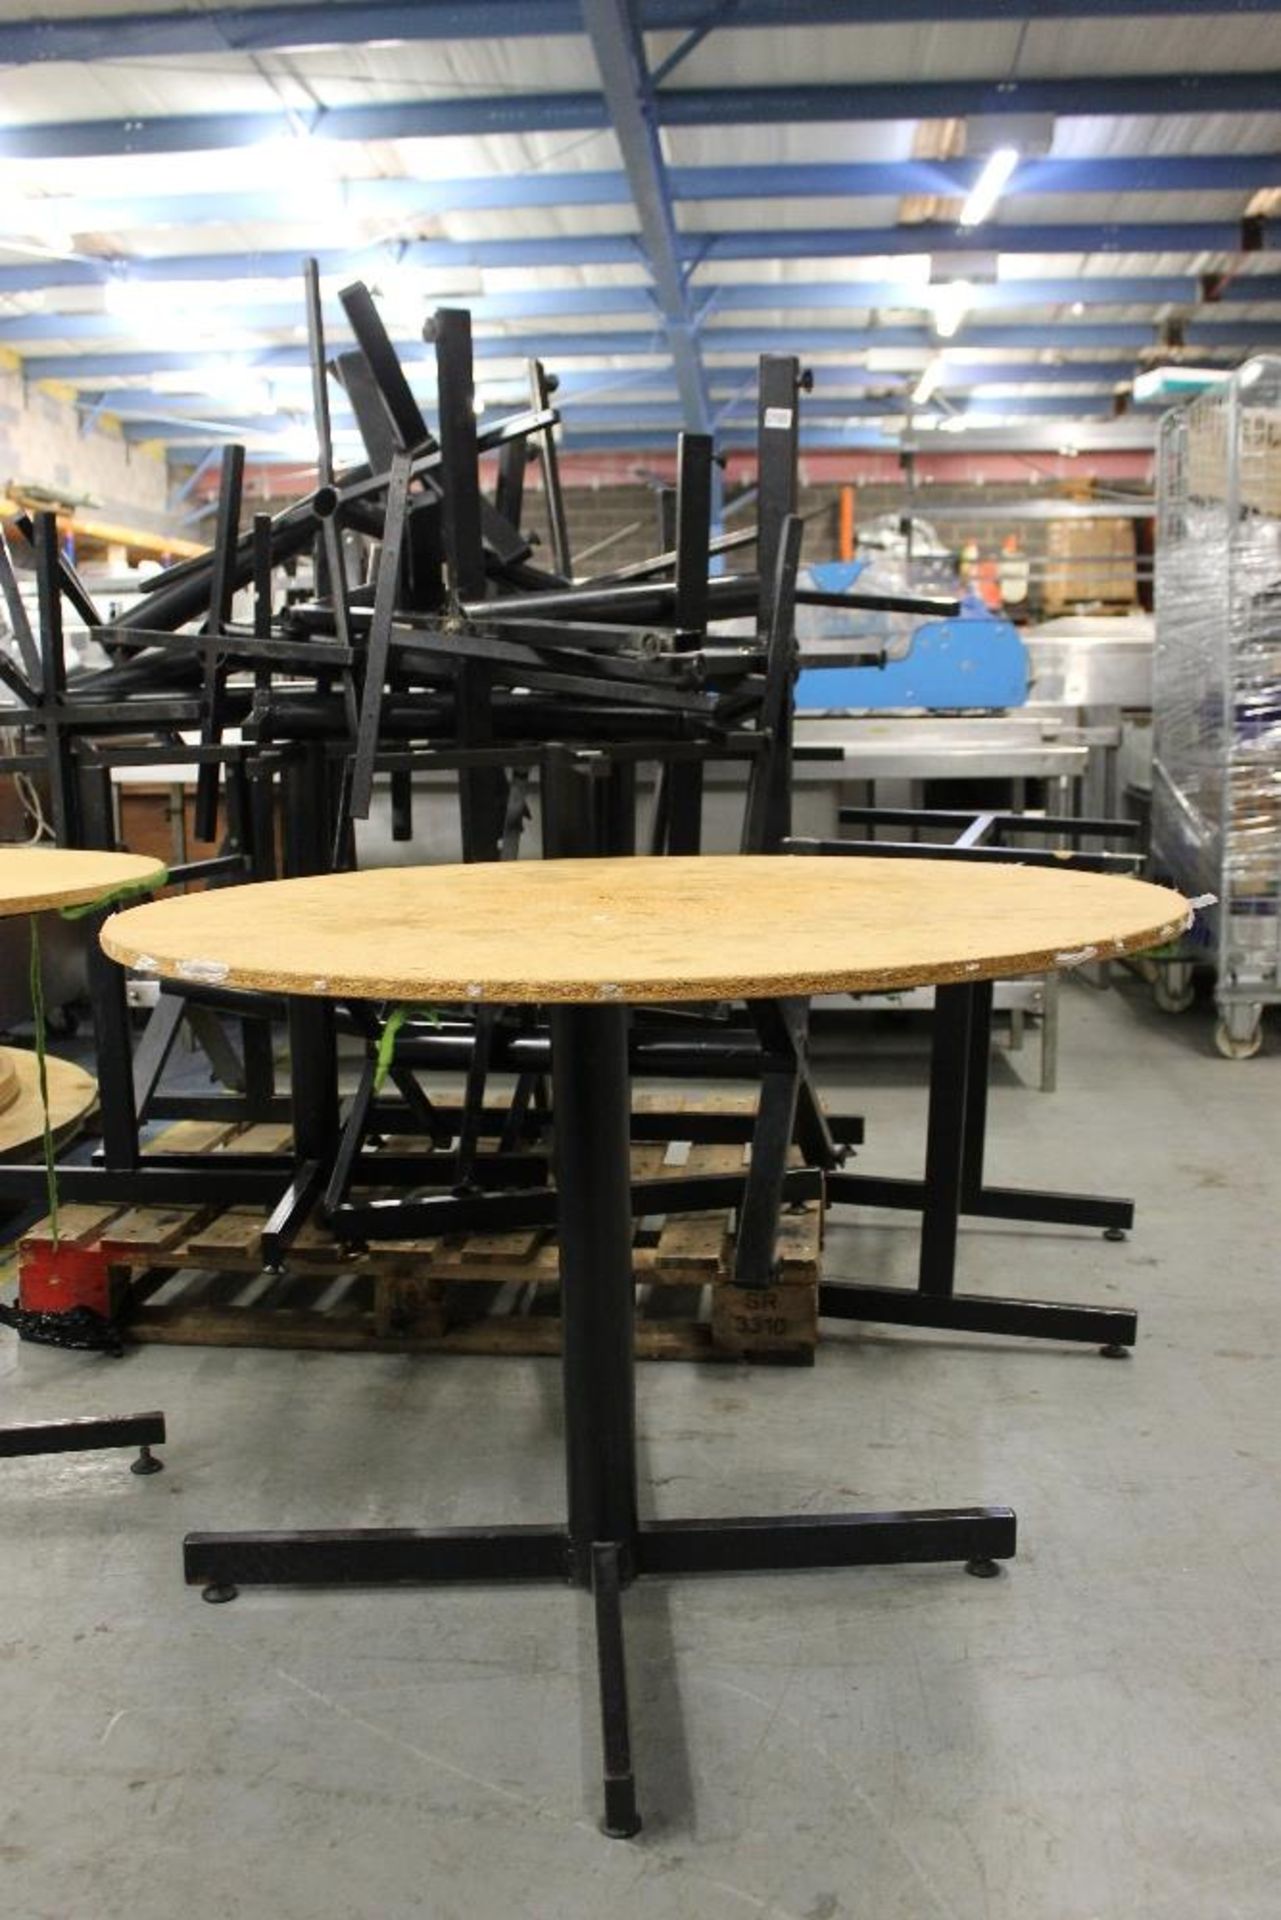 Job Lot of Banqueting Tables to be sold as 1 Lot – 27 in Total - 3 Sizes   4 x Large-10 Medium & - Image 2 of 3